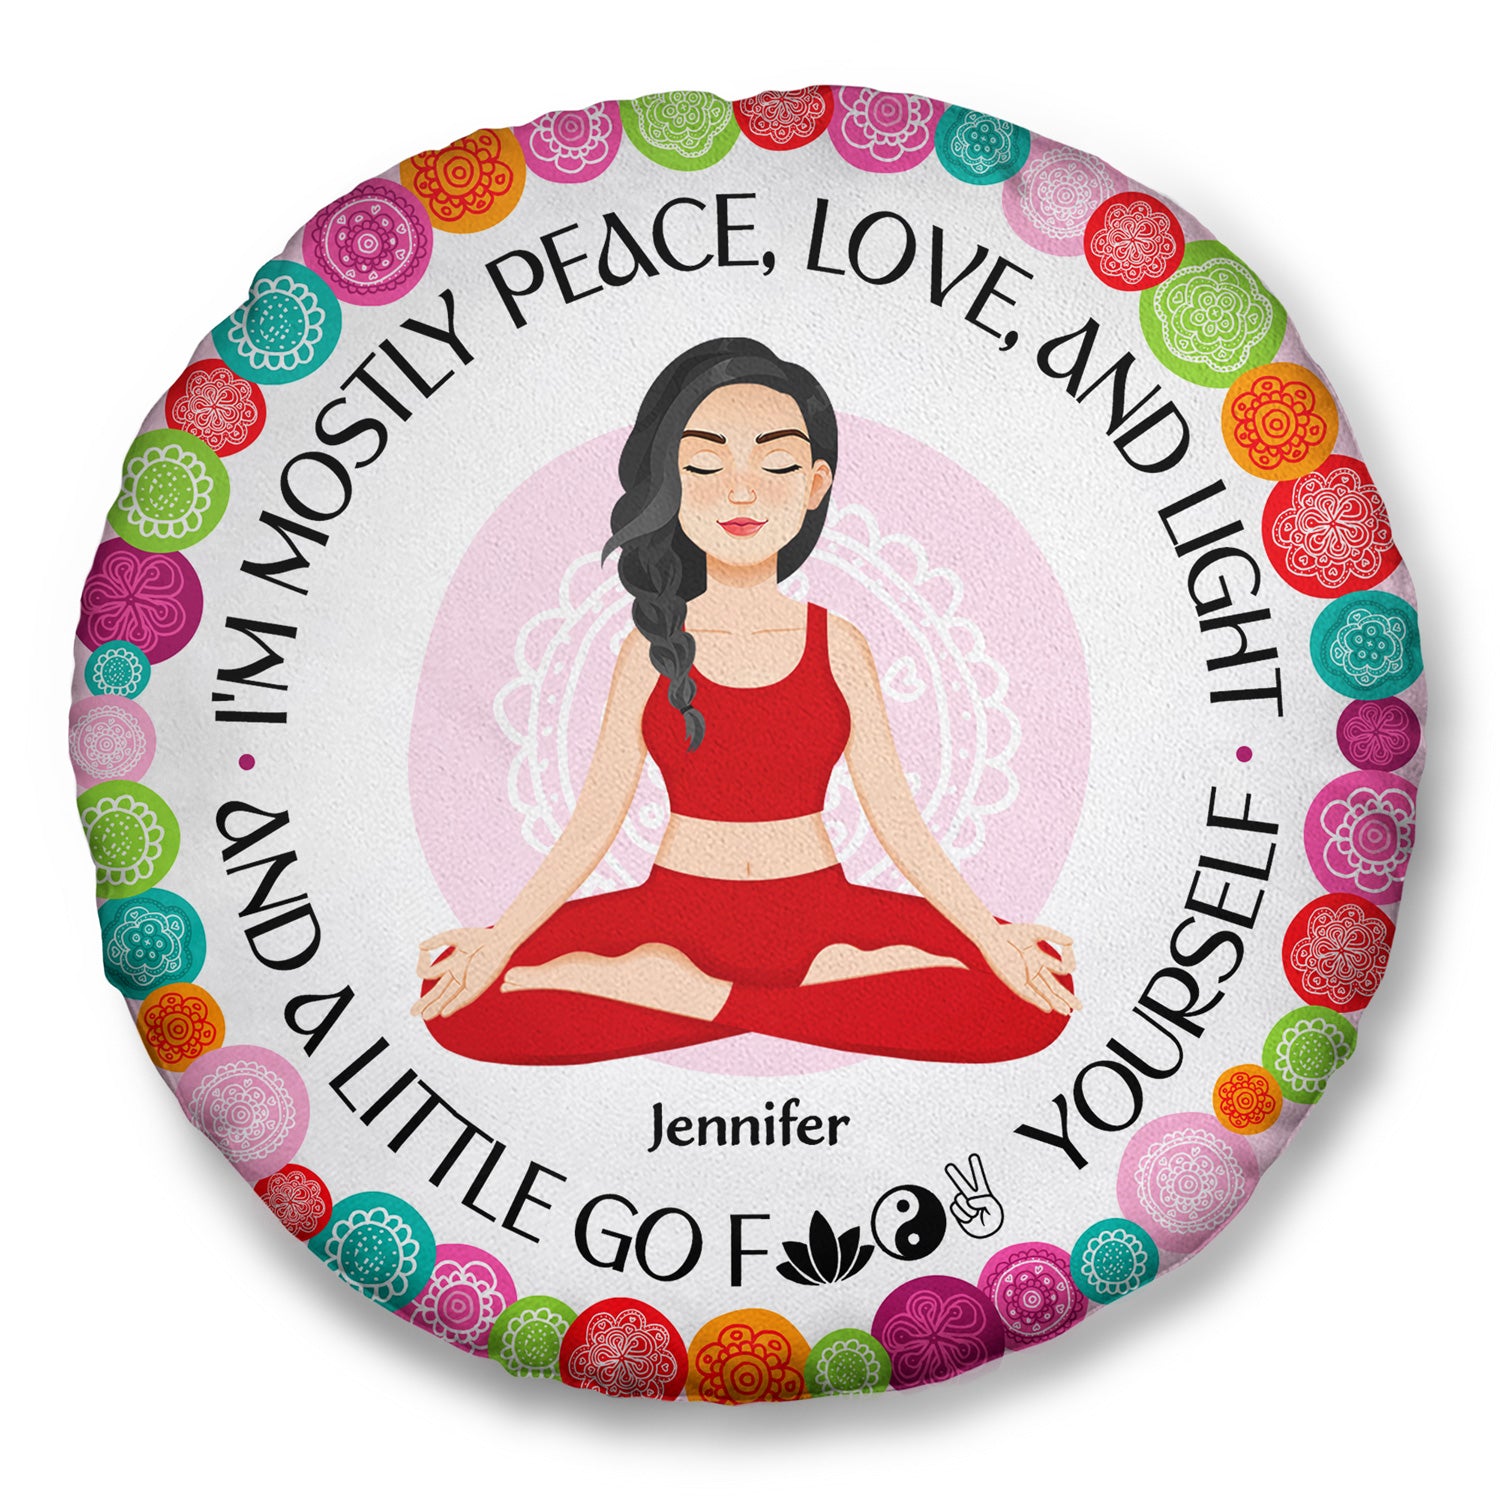 Please Be Mindful - Gift For Yoga Lovers - Personalized Wood Circle Si -  Wander Prints™